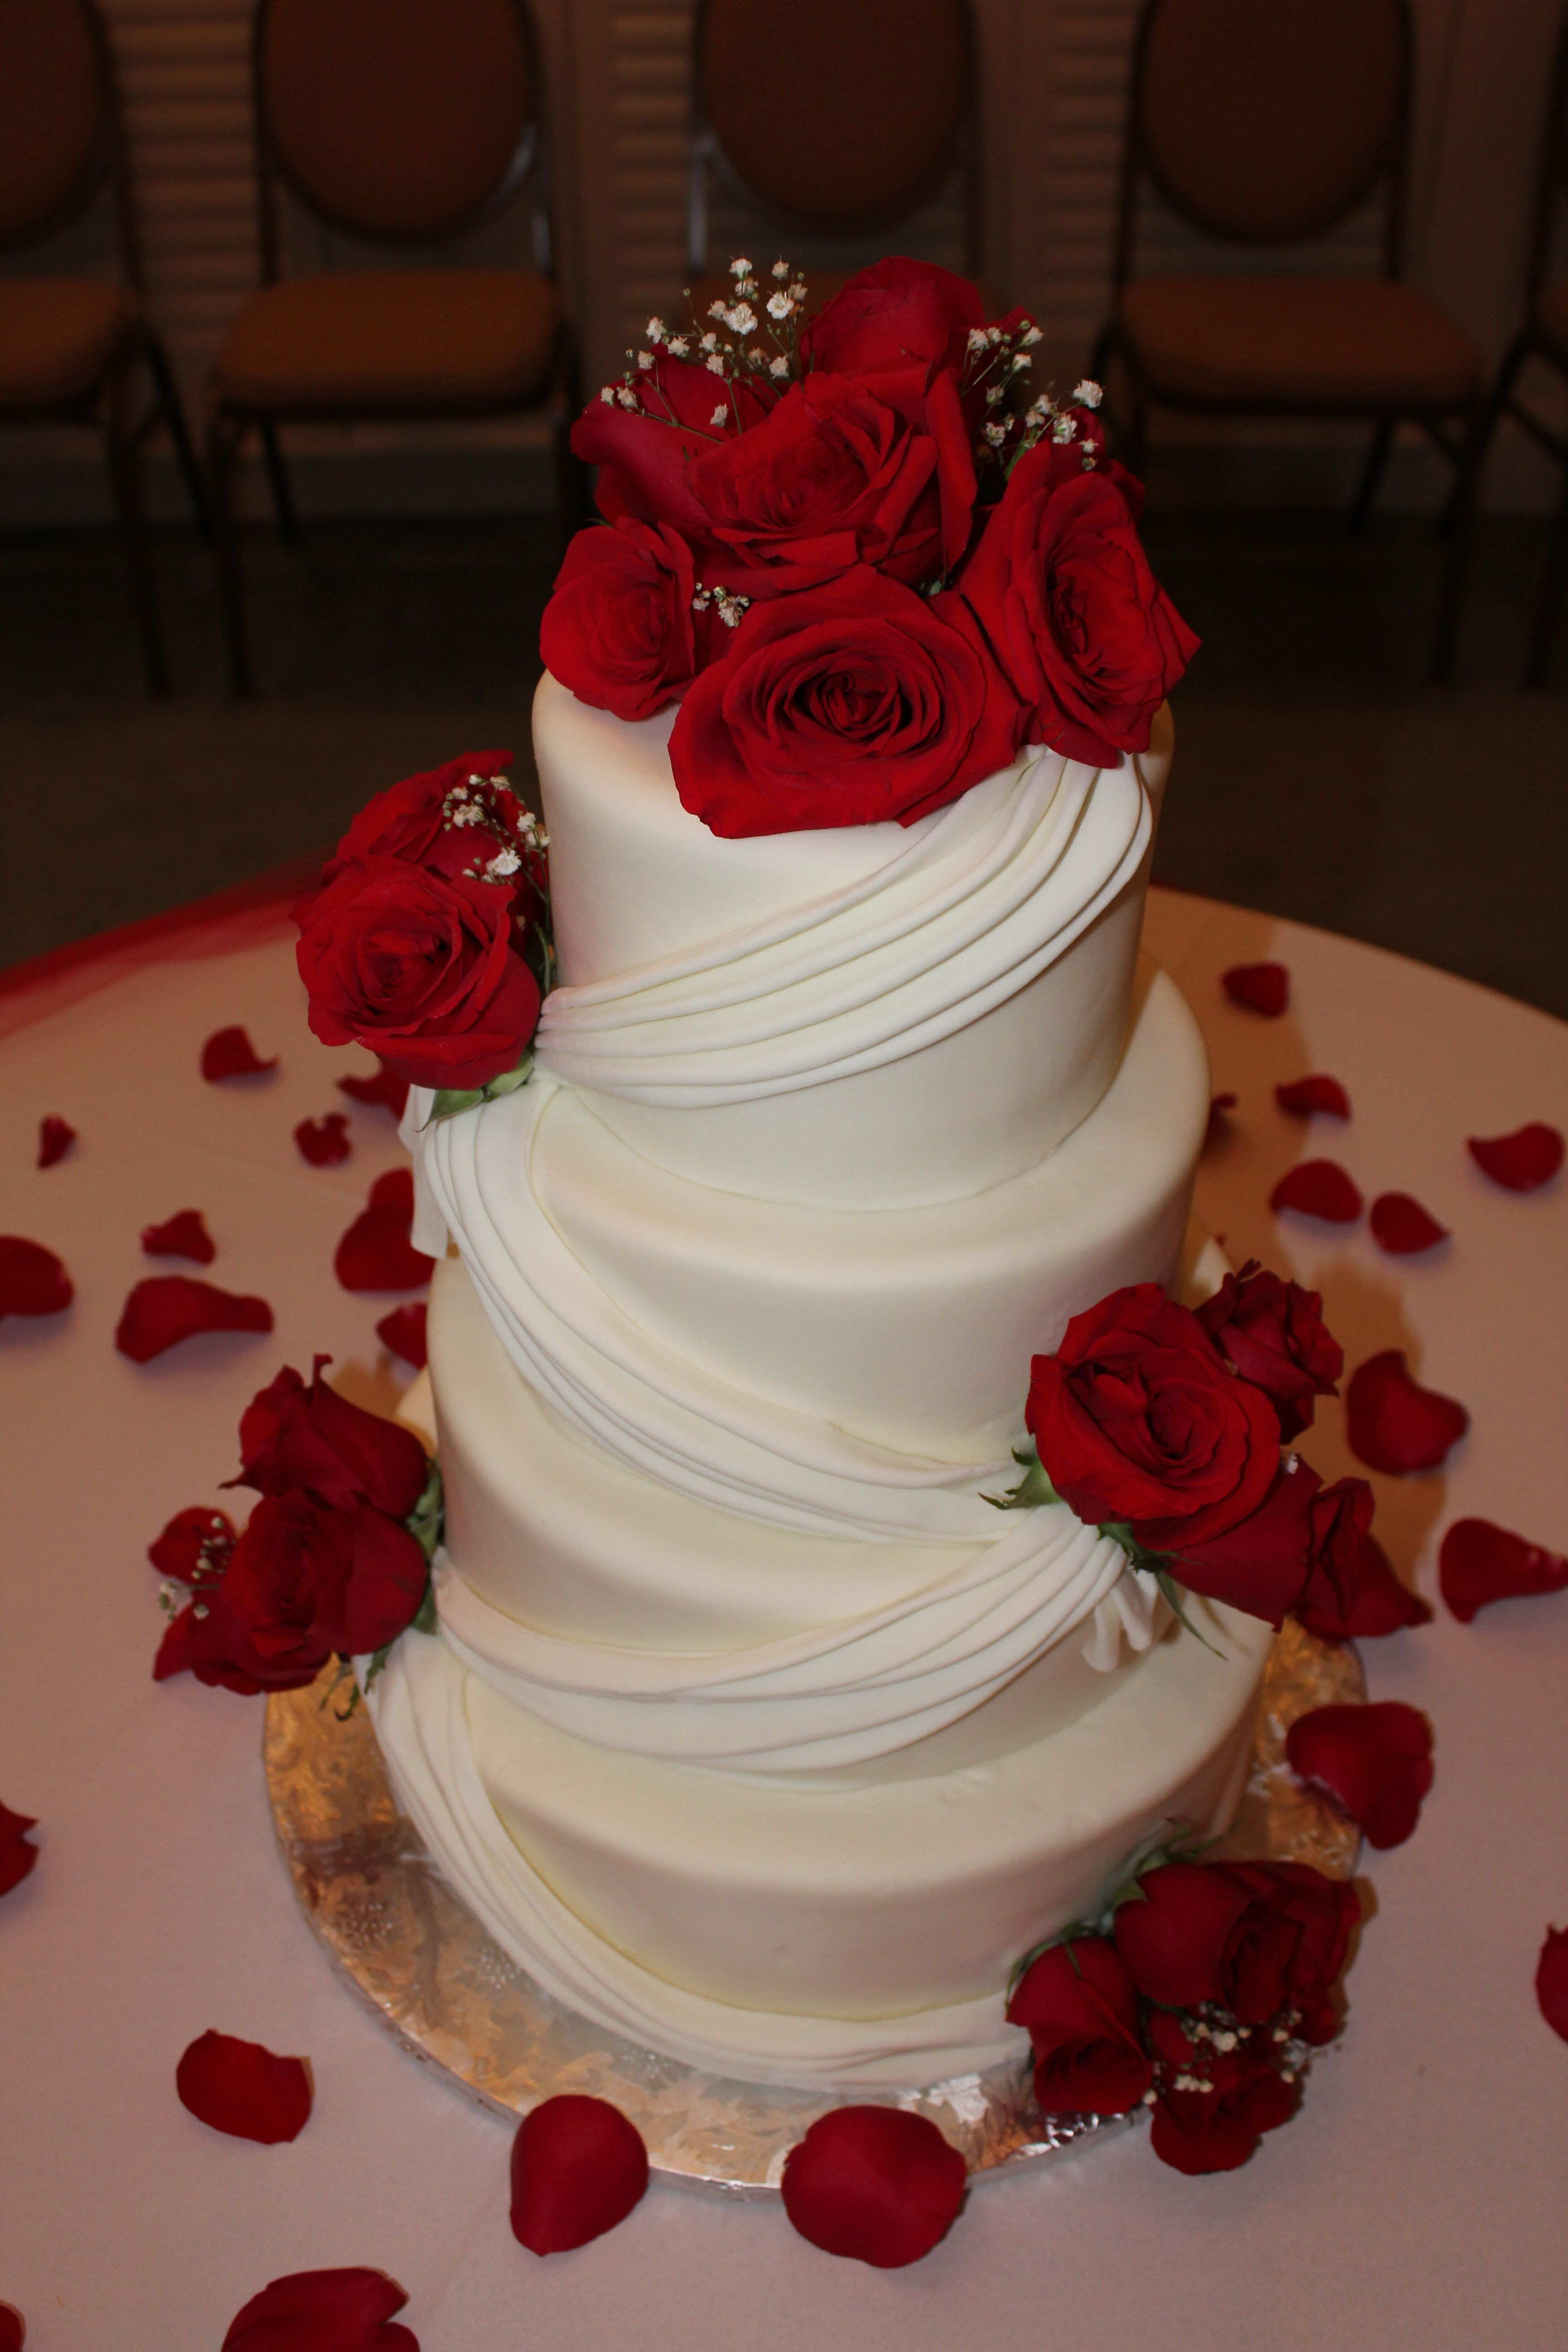 Red And White Wedding Cakes With Roses
 Red roses wedding cake Wedding Pinterest